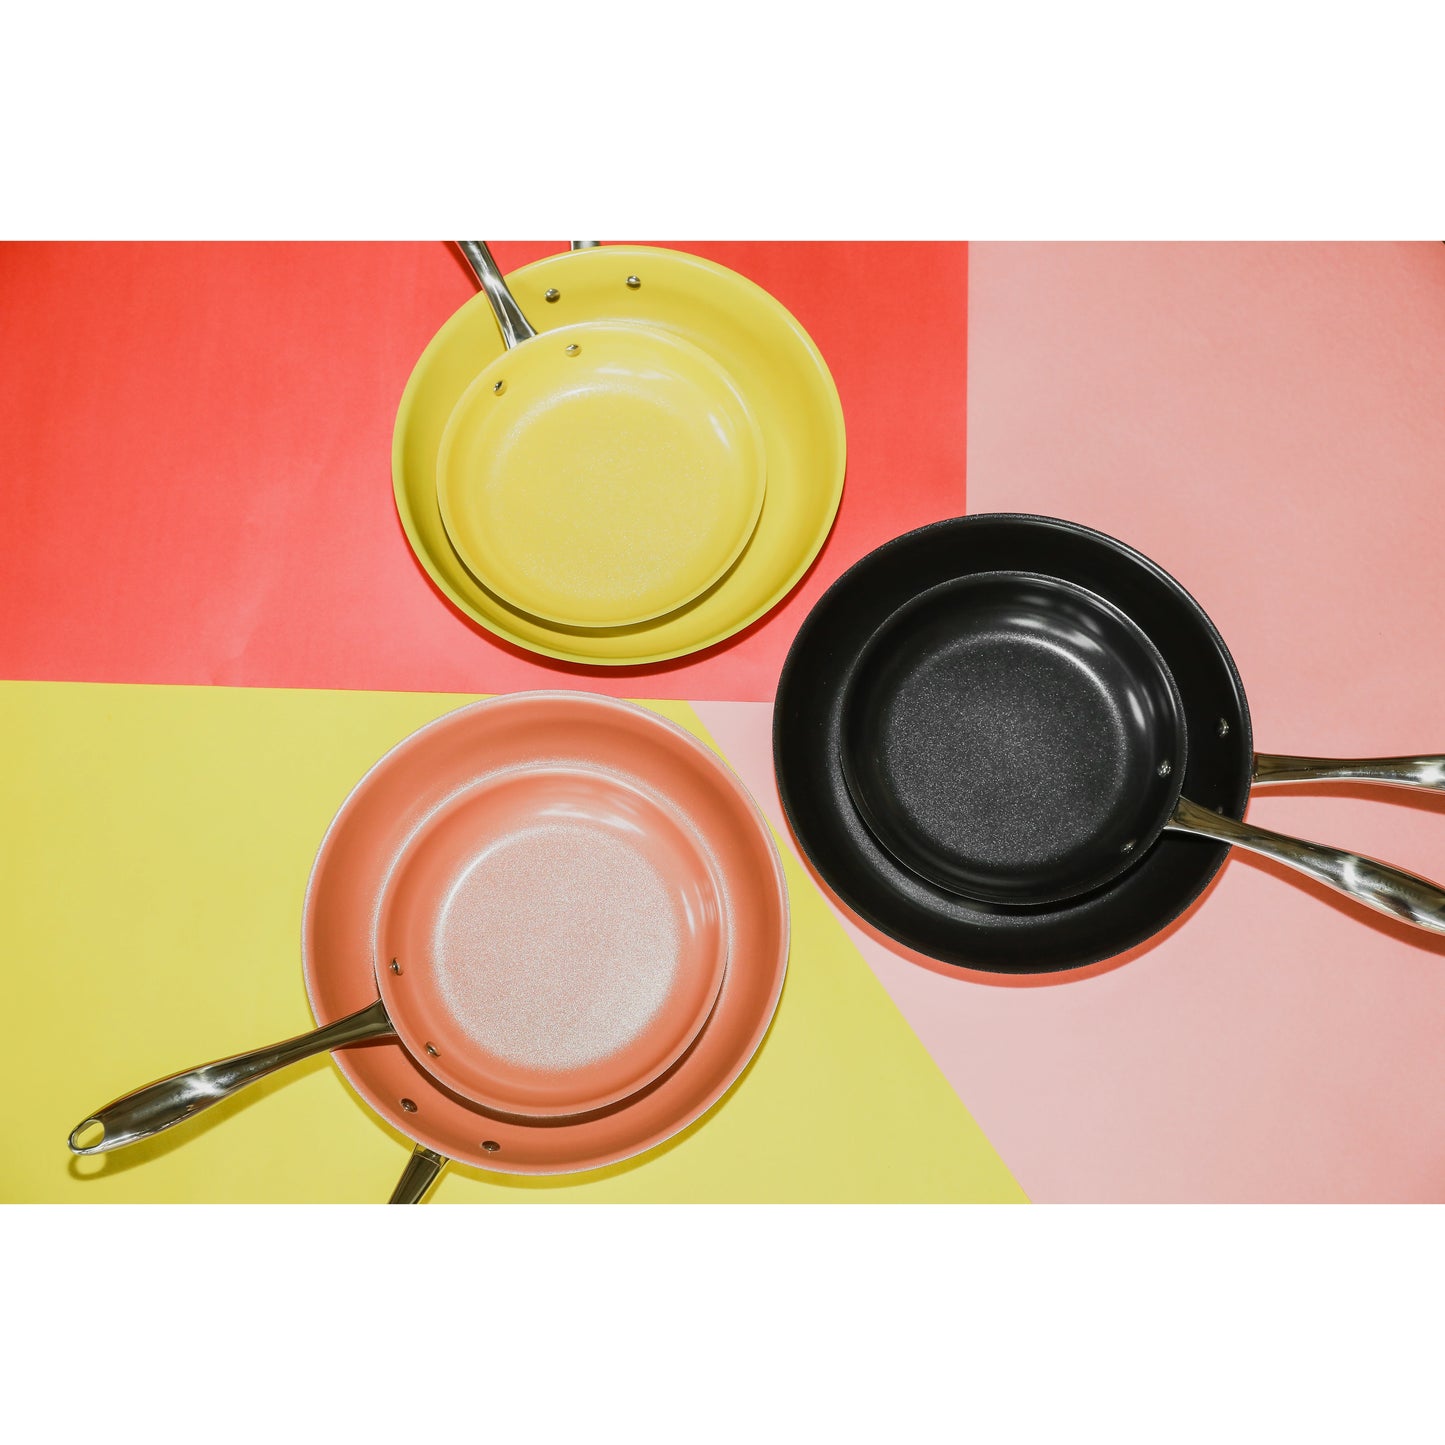 Concentrix Ceramic Nonstick Frypan Set - BagLunchproduct,corp